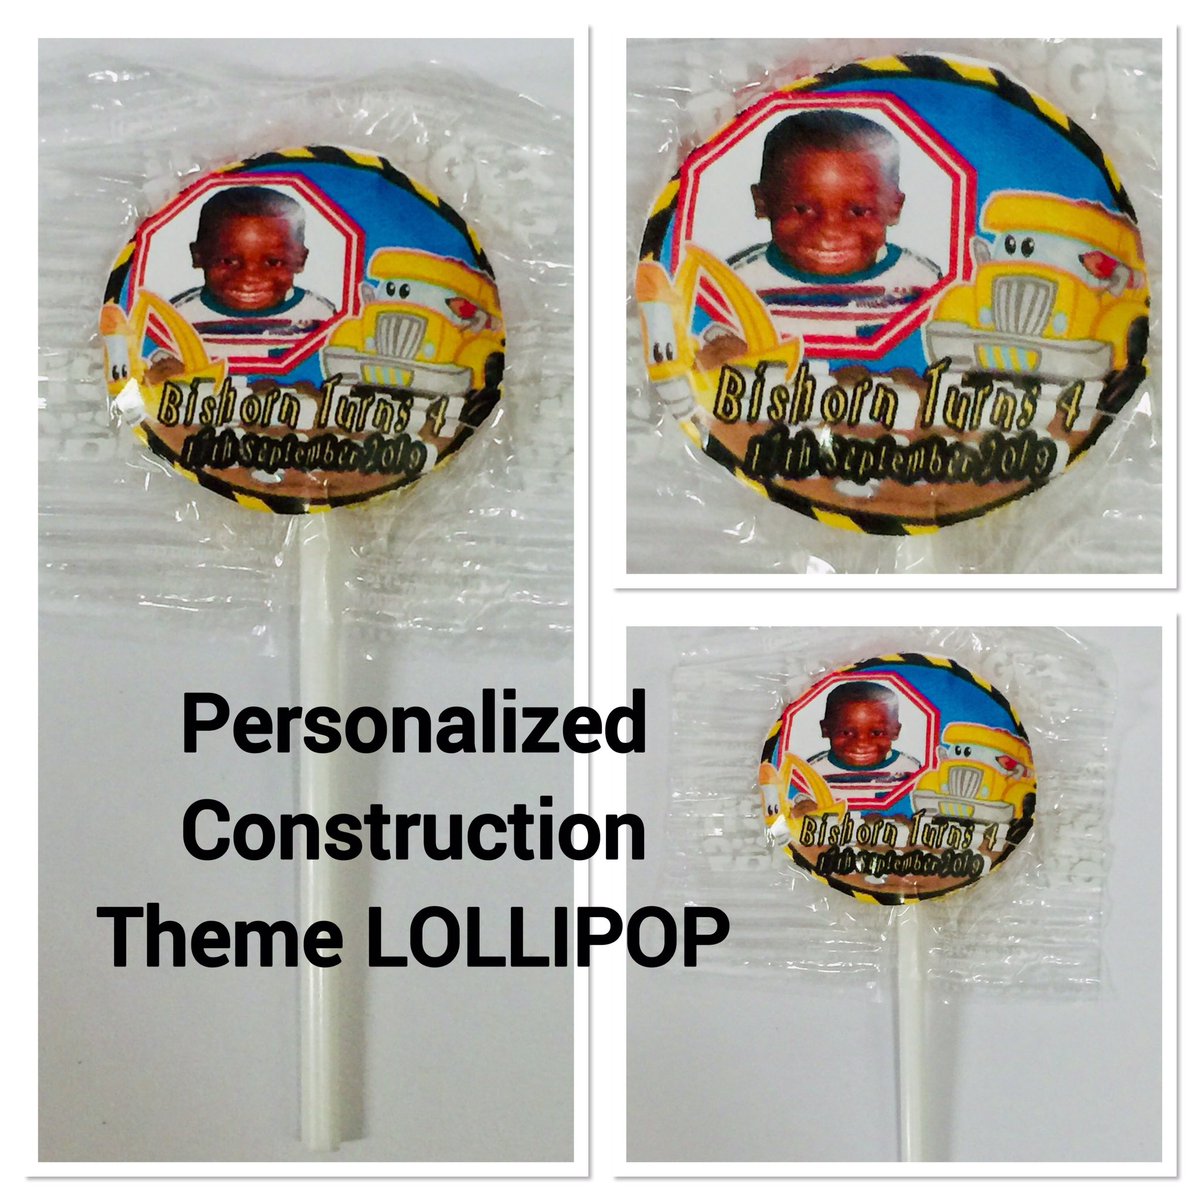 Personalized Construction Theme Party Favors #Mentos #Chubby #Water #Lollipops #ConstructionThemePartyFavors #PersonalizedPartyFavors #PersonalizedFavors #CustomFavors #PartyFavors #Favors #PartyThemes #PartyIdeas #PartyPlanning #DigitalDesigns #DigitalDownloads